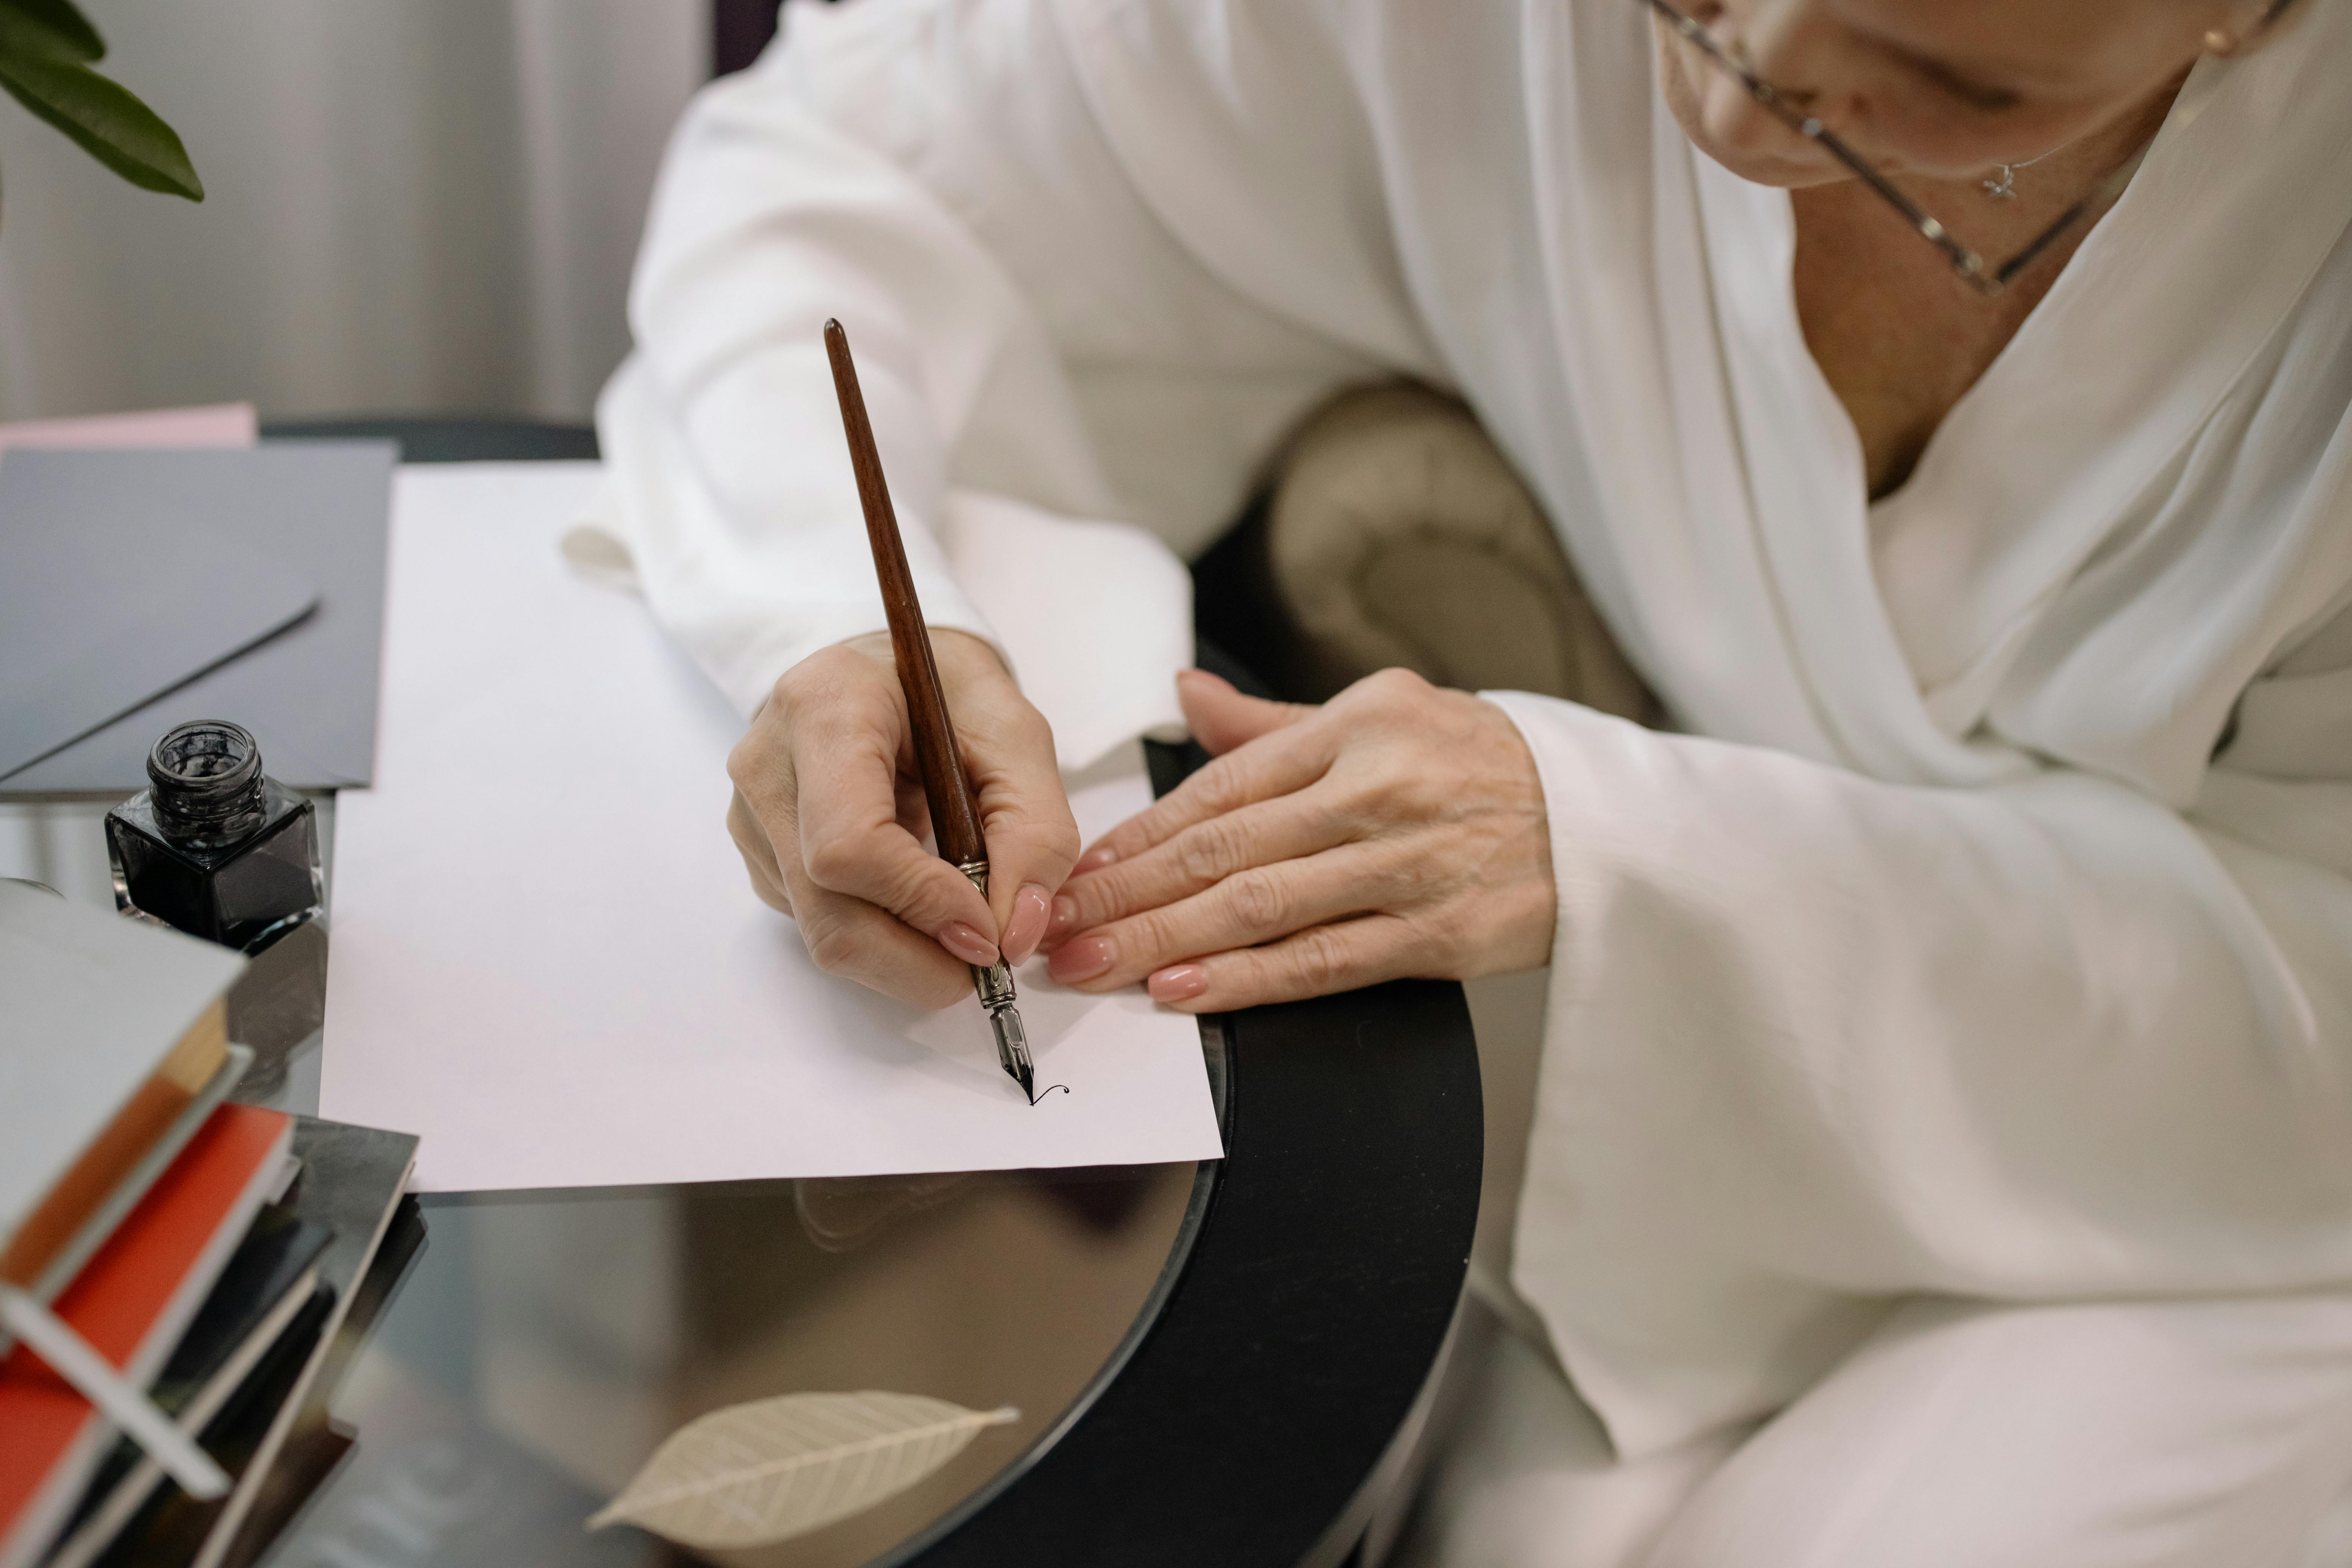 Free A Person in White Robe Writing on the White Piece of Paper Stock Photo